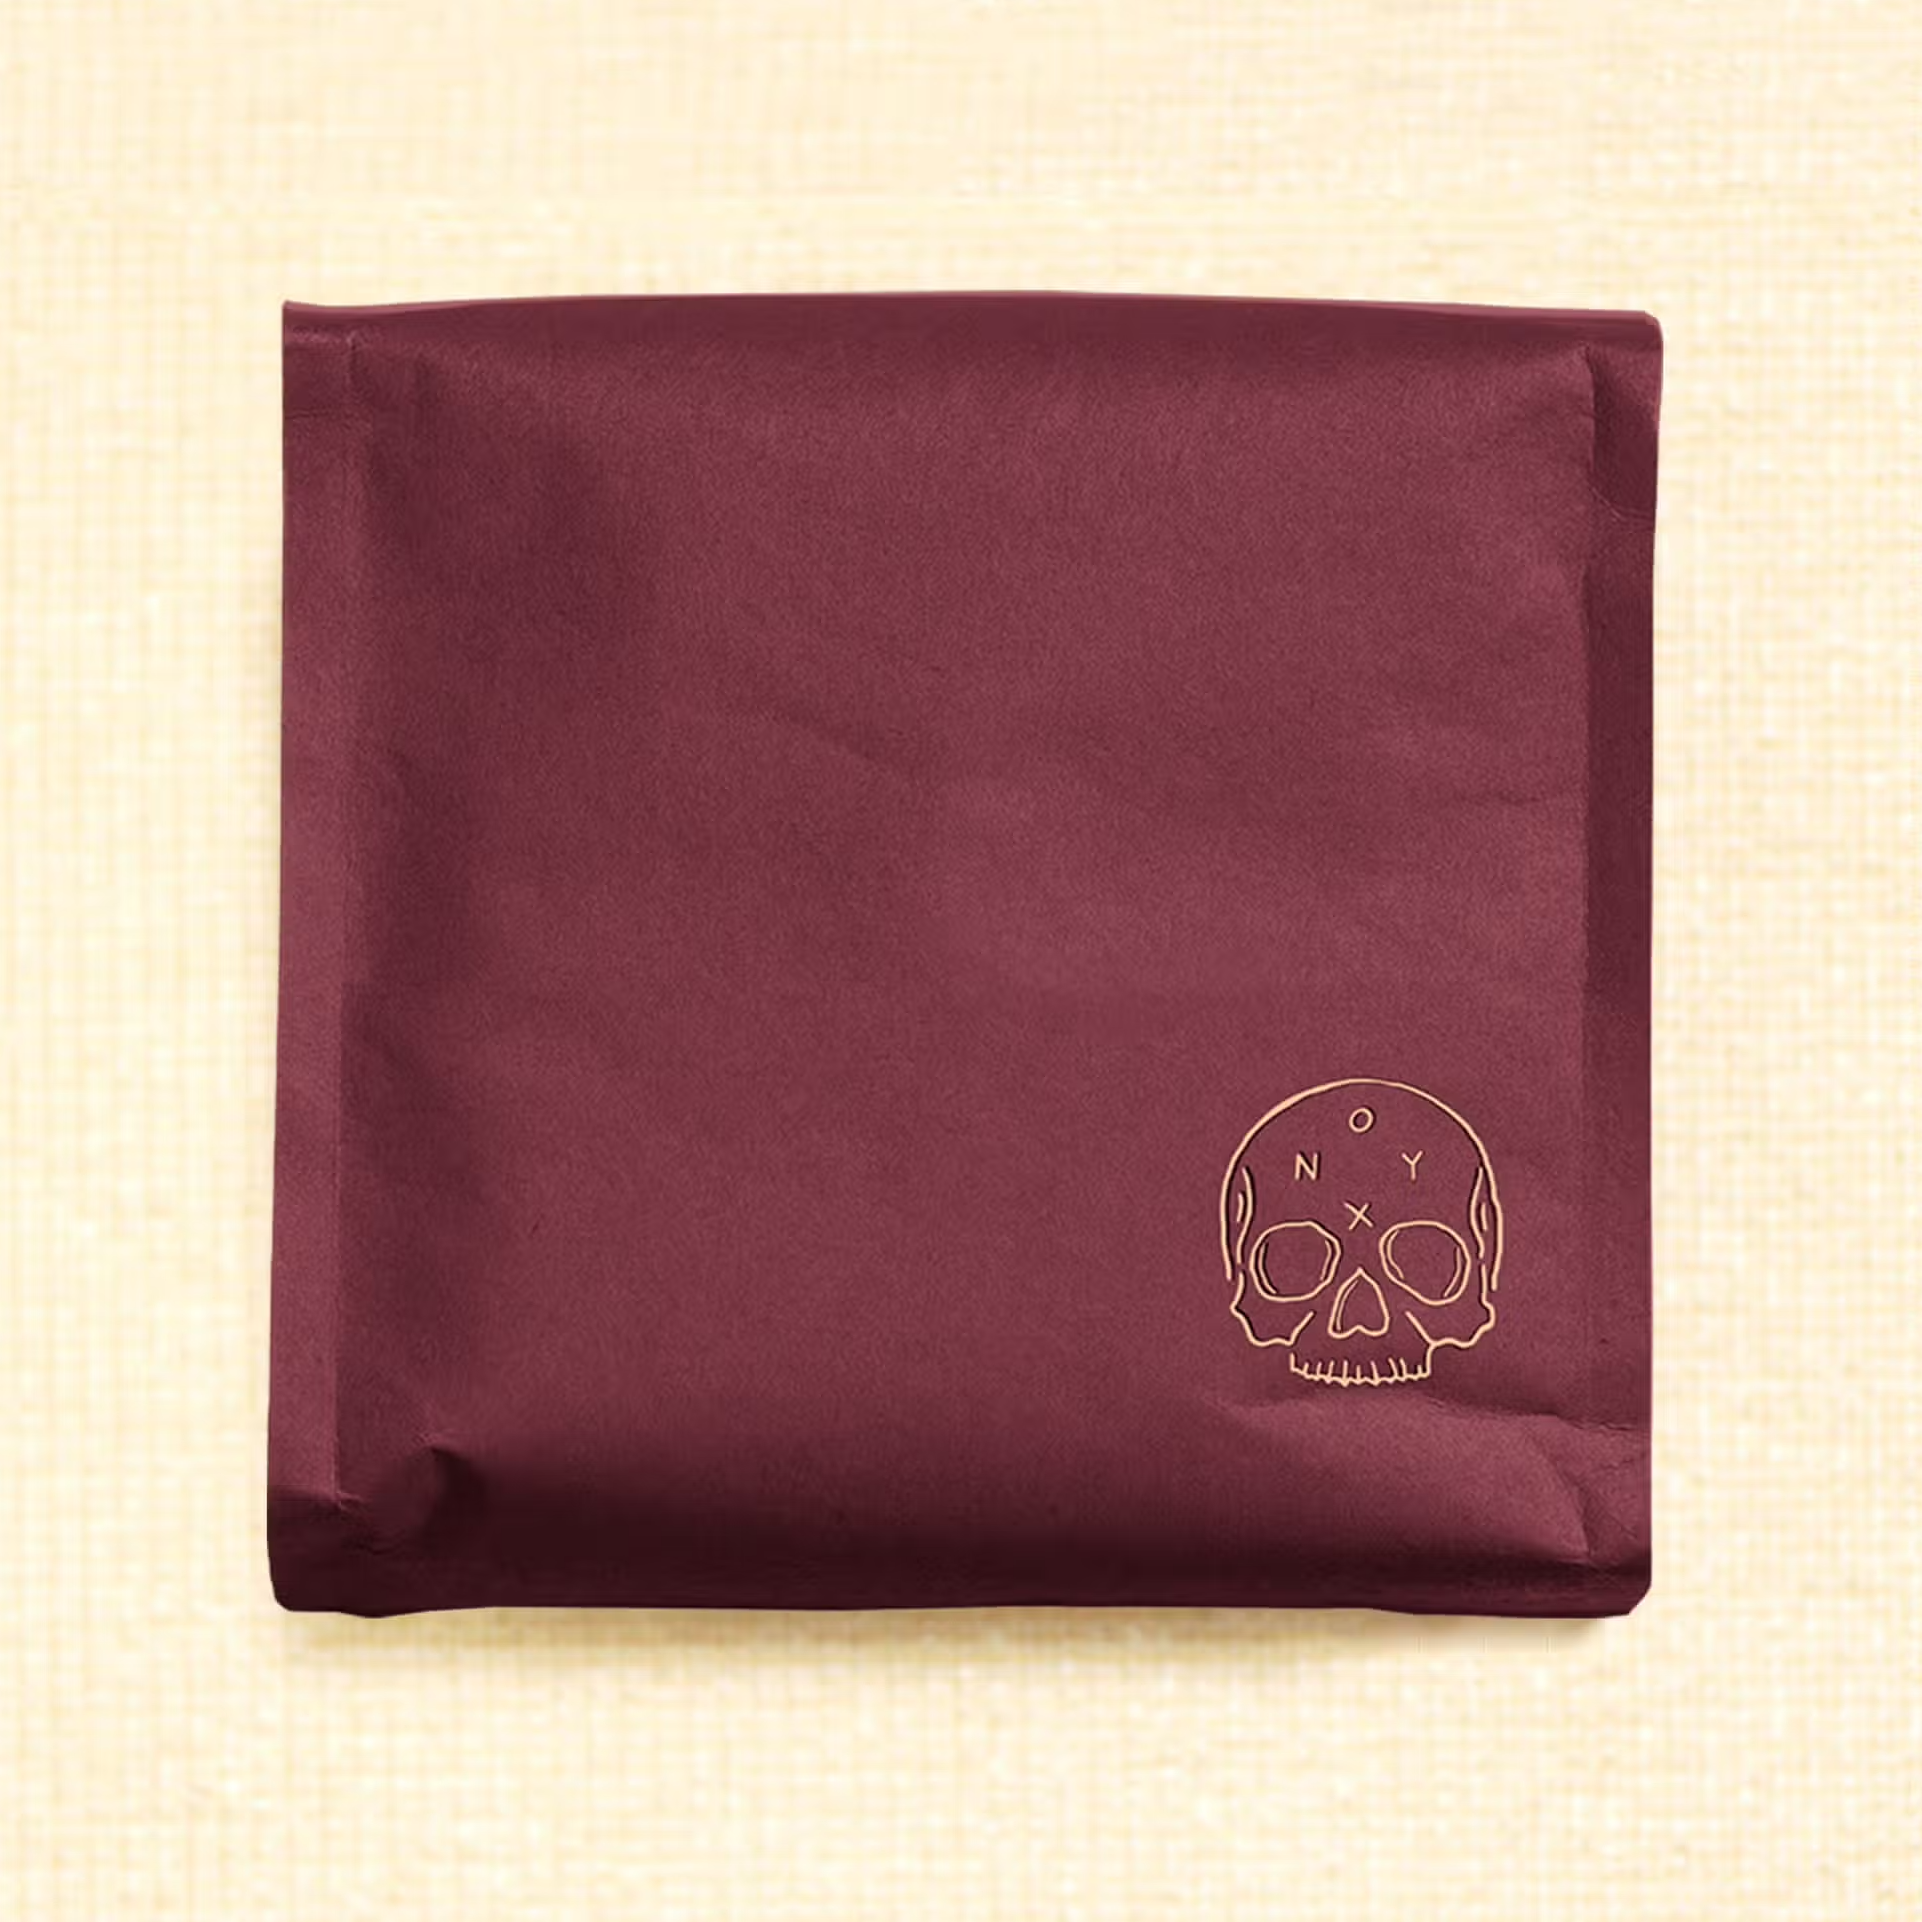 burgundy coffee bag with yellow skull illustrated on the bottom right hand corner. Inside the skull is "ONYX"